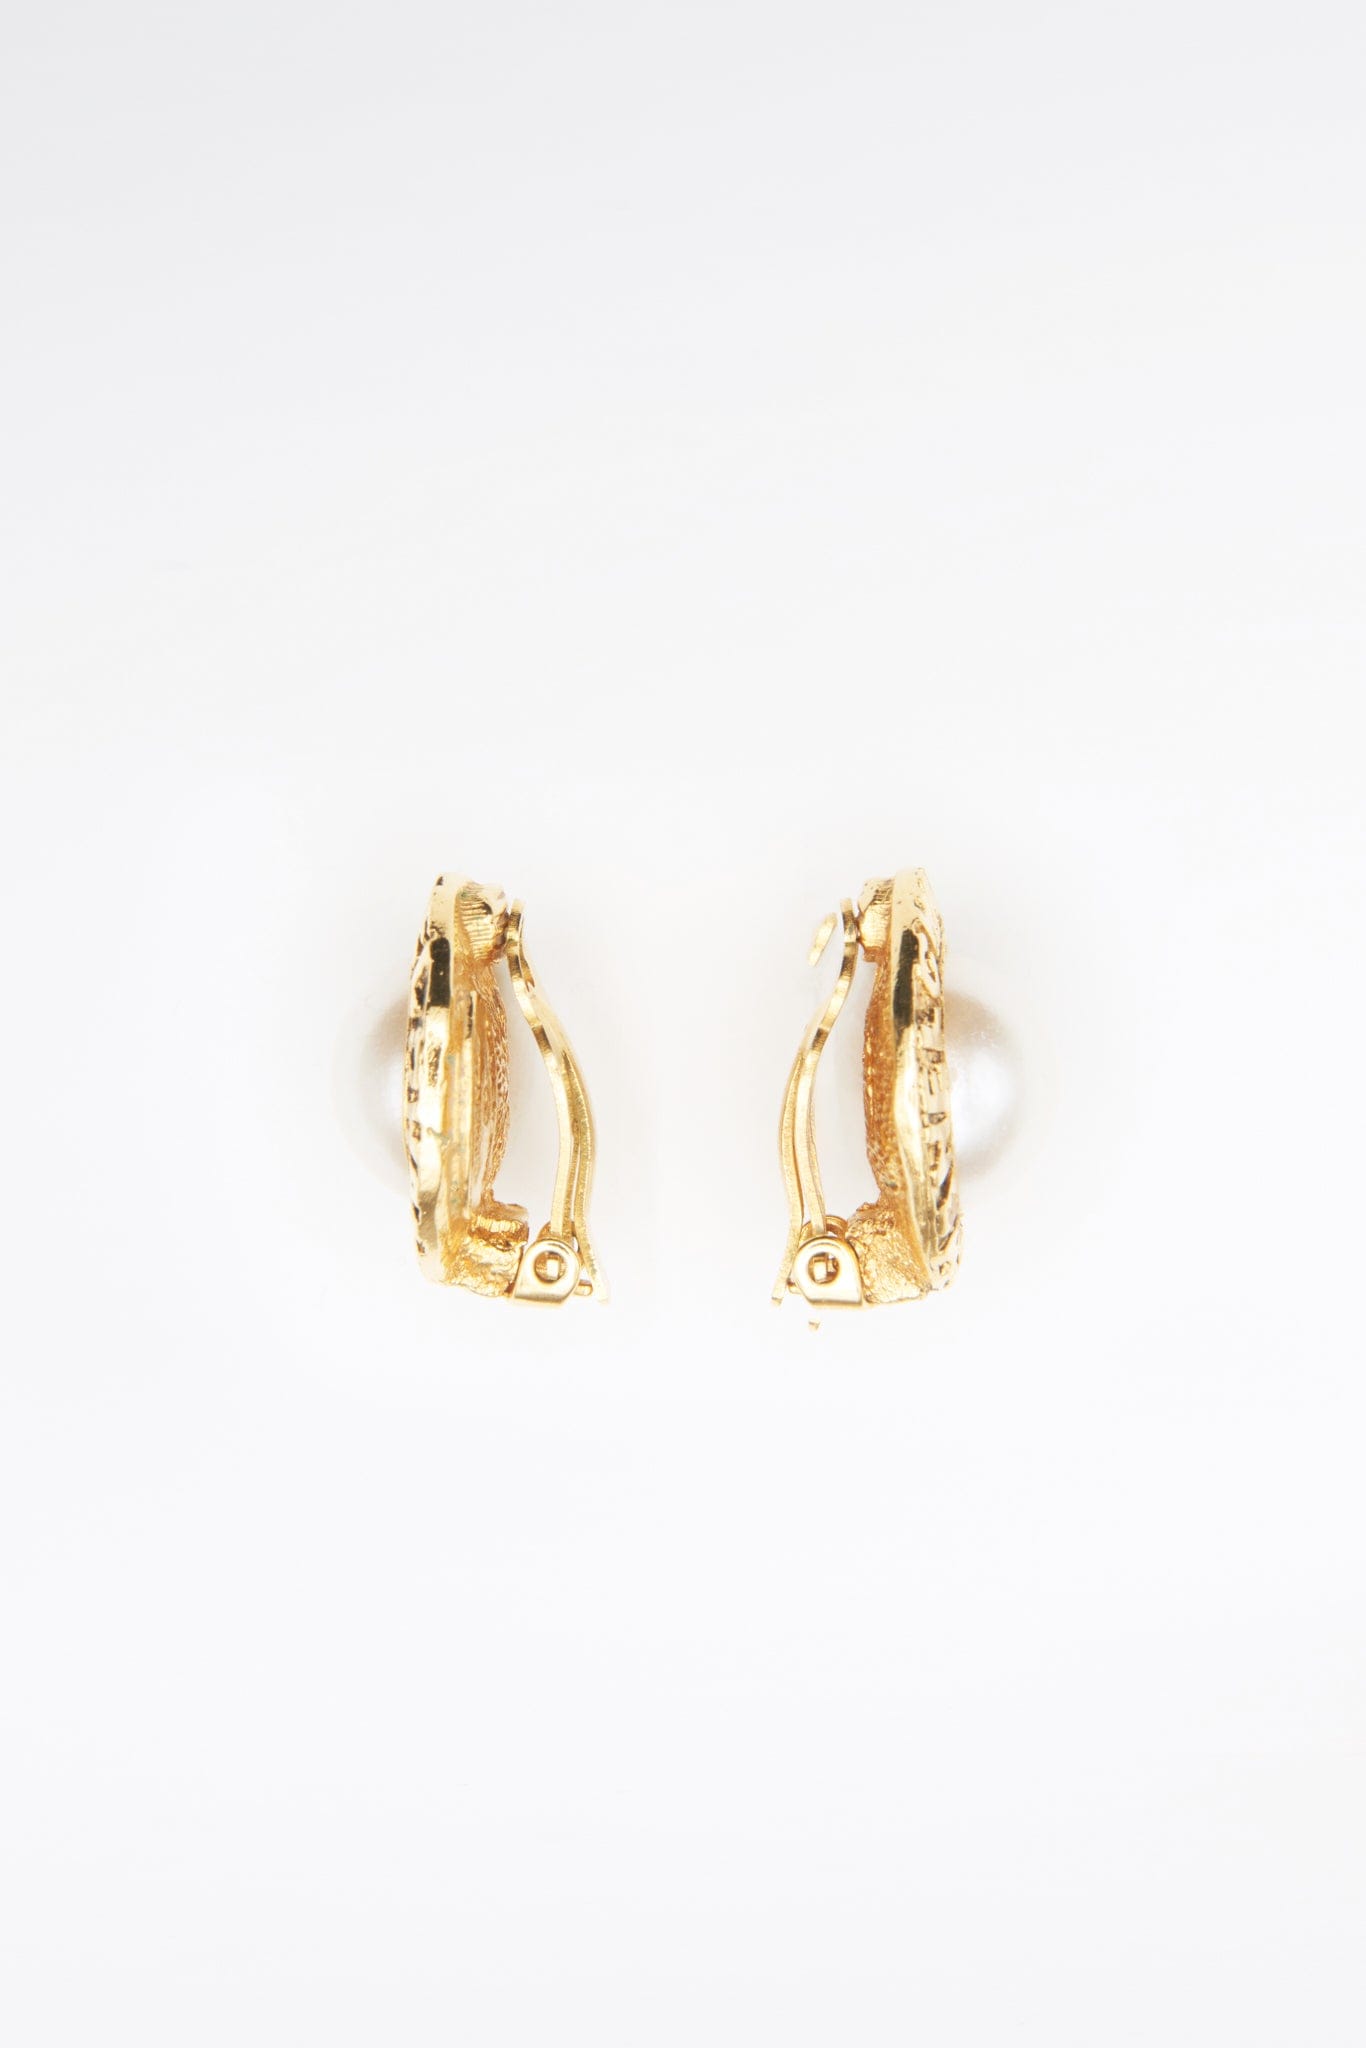 Vintage Chanel Gold and Faux Pearl Earrings